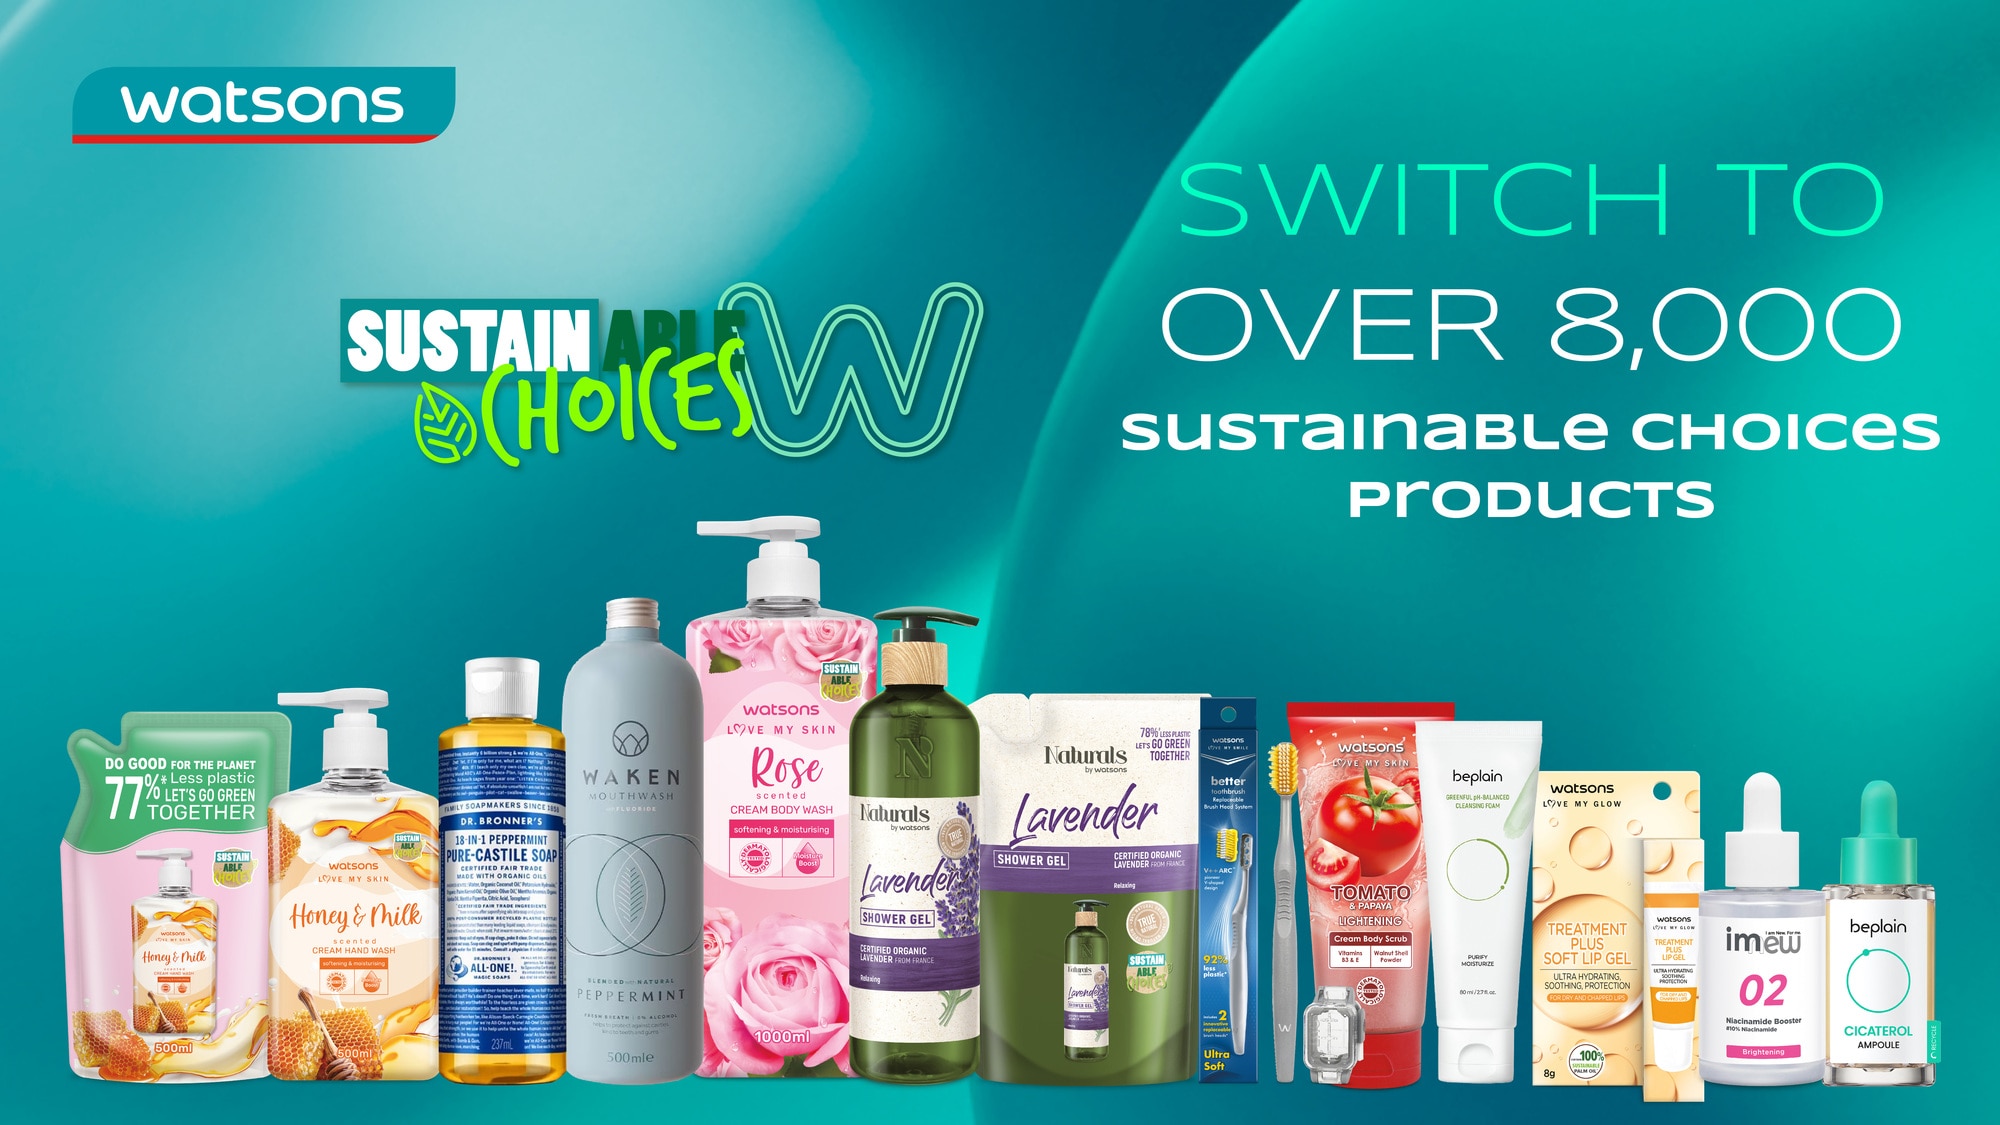 Watsons Furthers its Sustainability Commitment By Increasing Sustainable Choices Products to 8,000